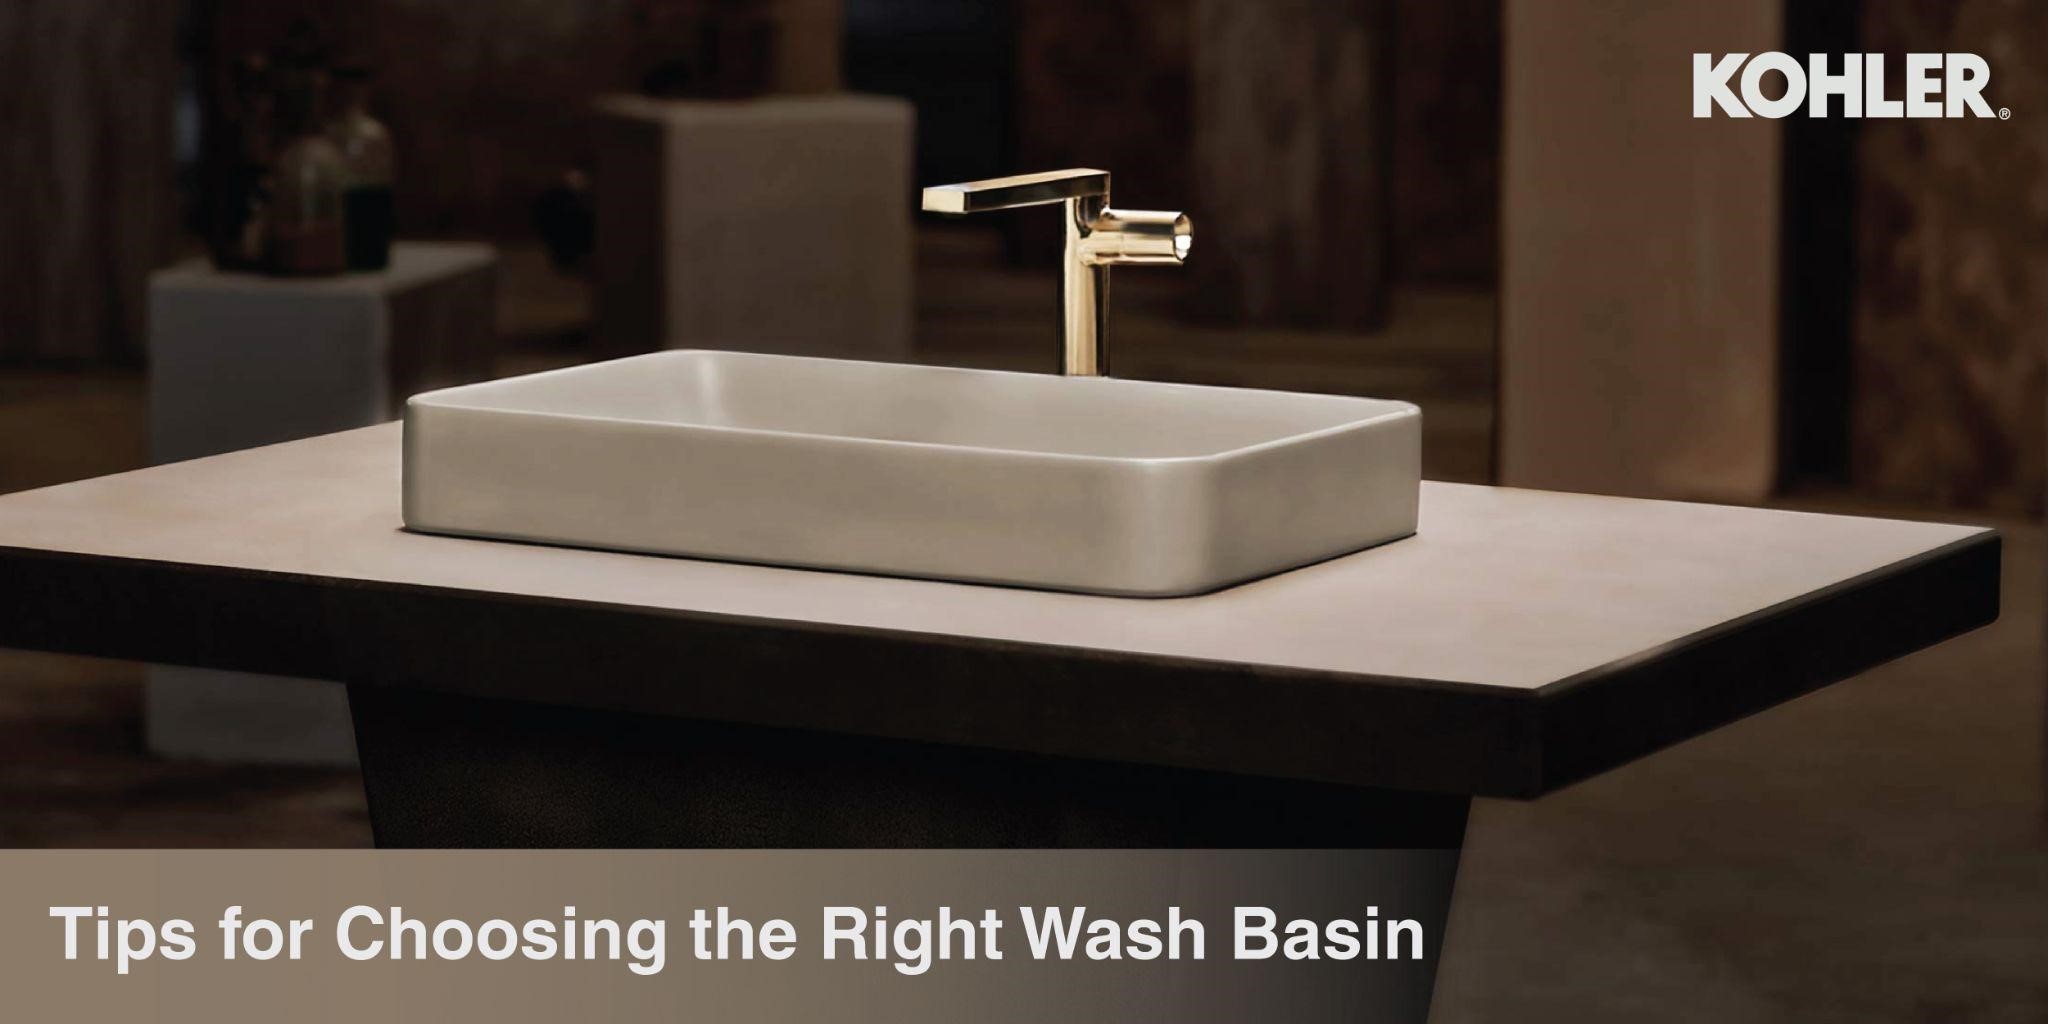 5 TIPS FOR CHOOSING THE RIGHT WASH BASIN FOR YOUR BATHROOM